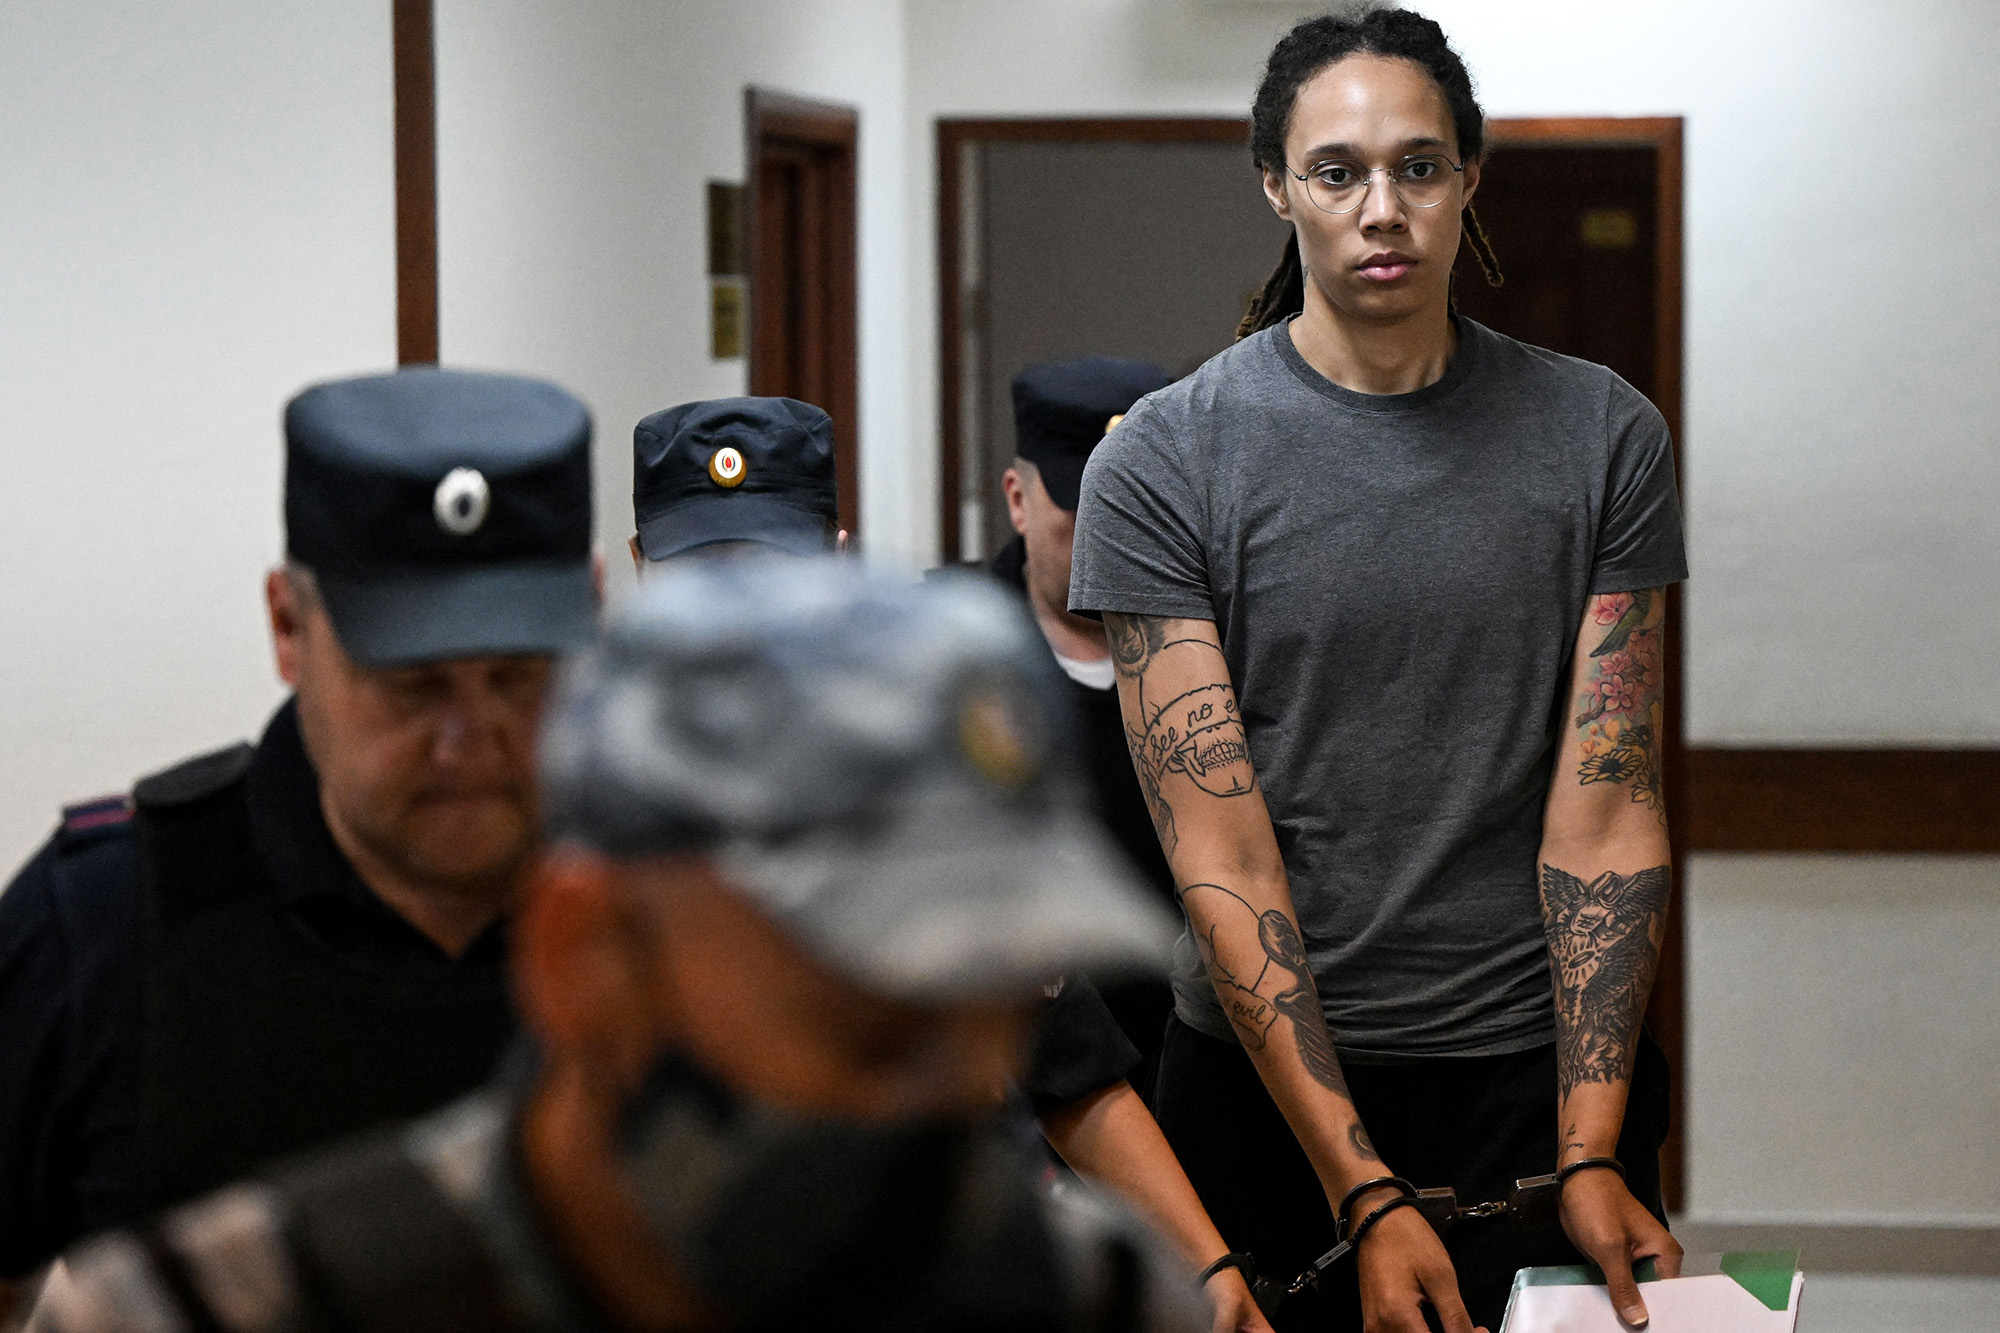 US' Women's National Basketball Association (NBA) basketball player Brittney Griner arrives to a hearing at the Khimki Court, outside Moscow, Russia, on August 4.